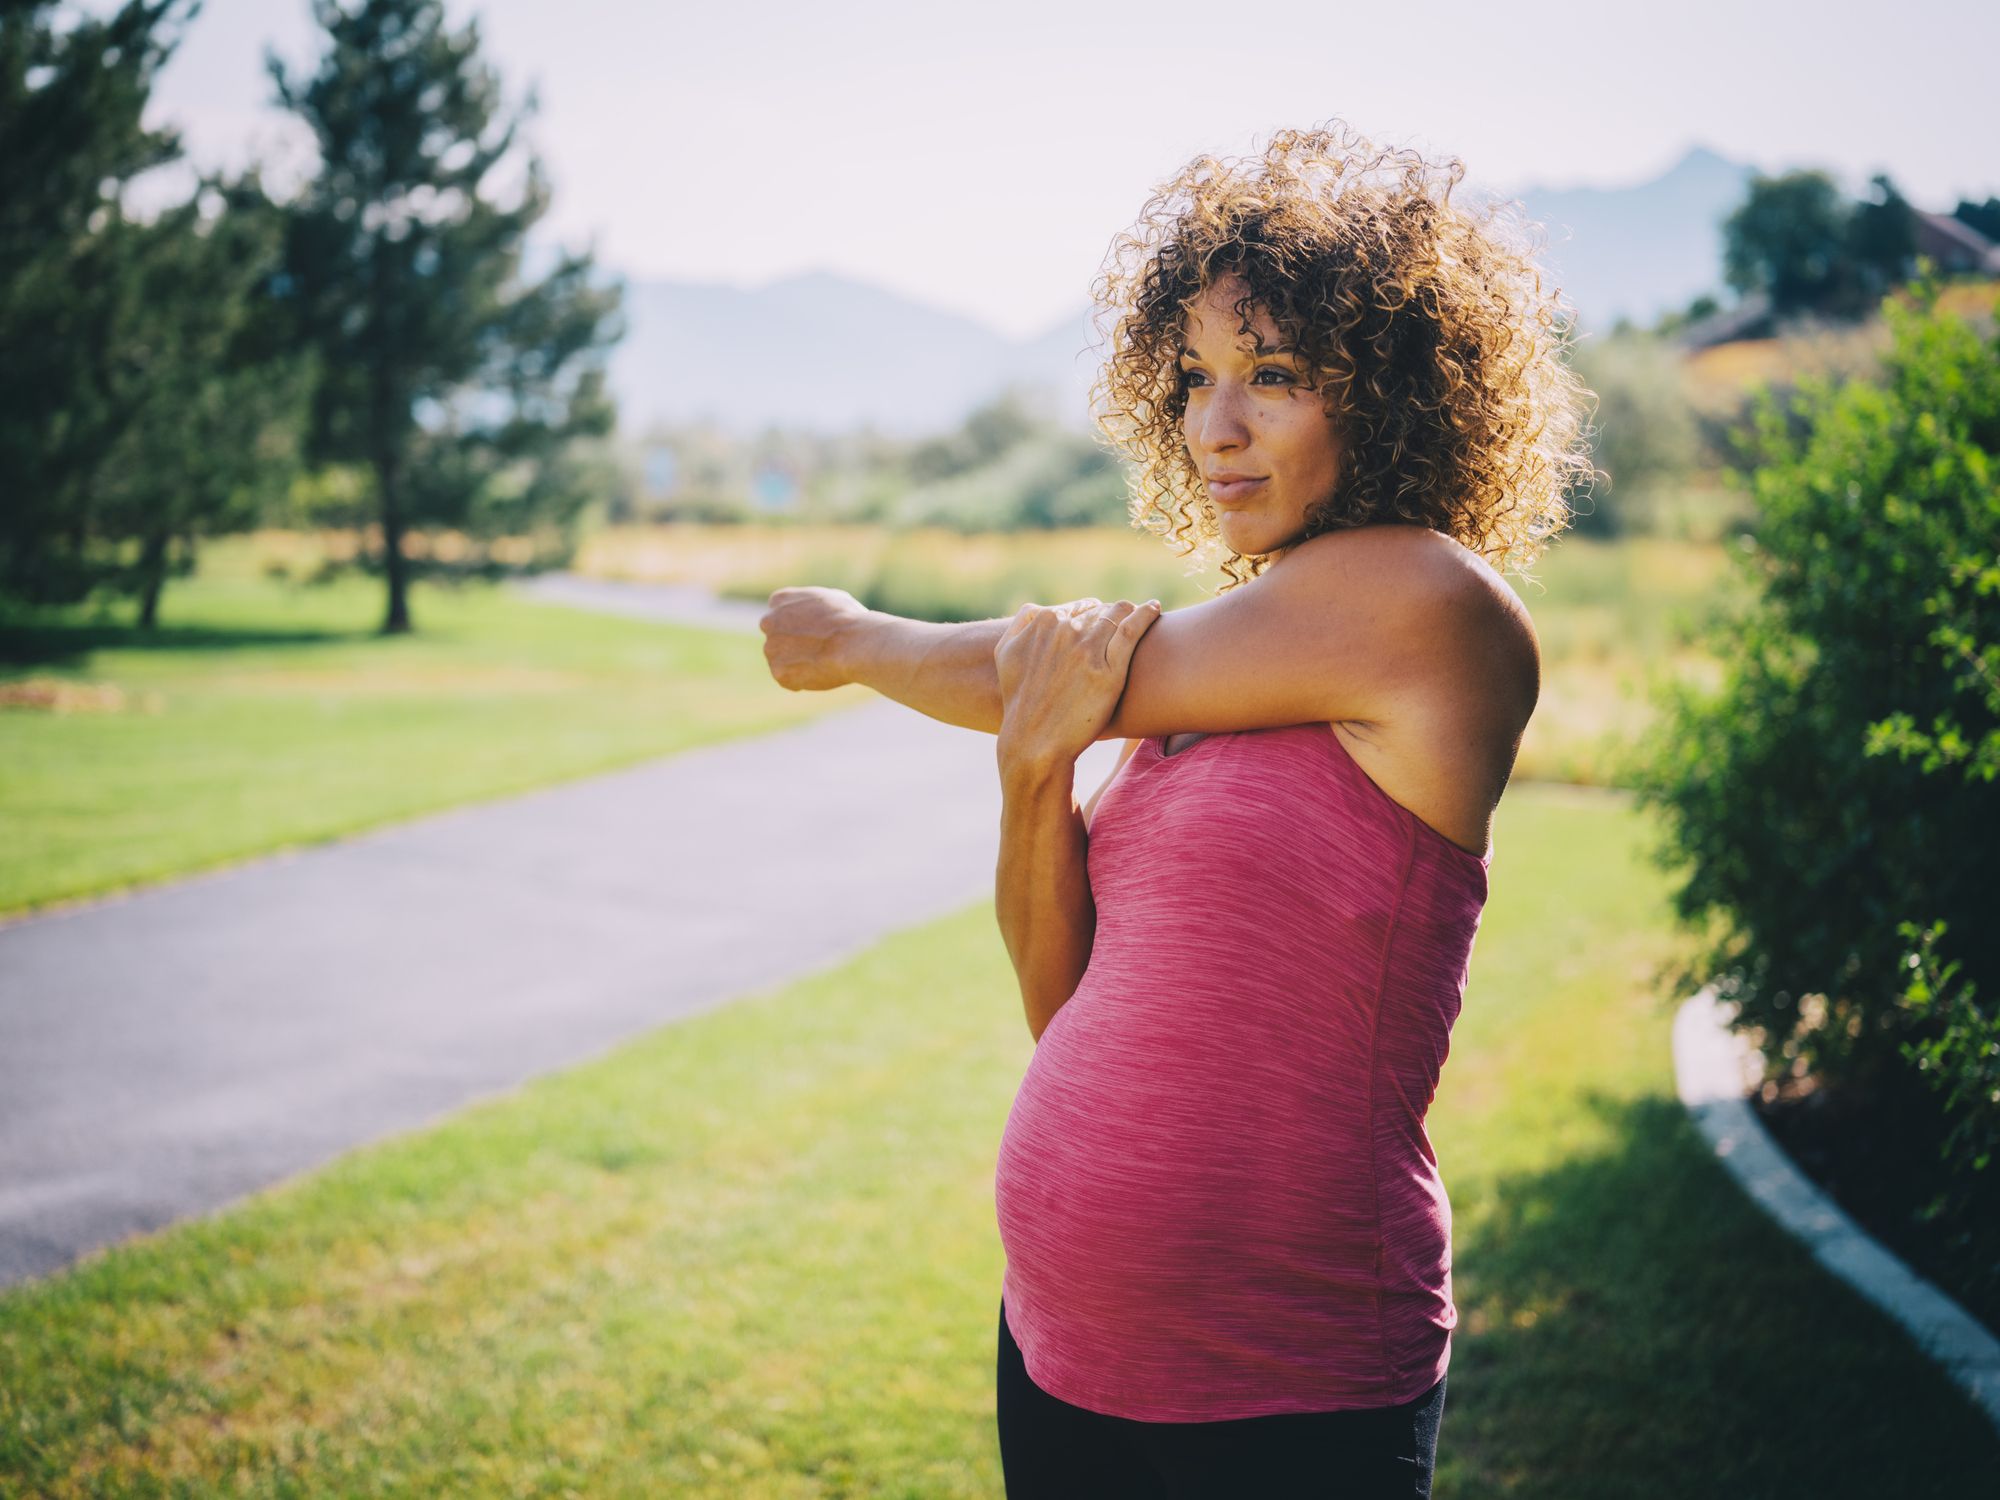 Is cryptic pregnancy dangerous for the mother or baby?